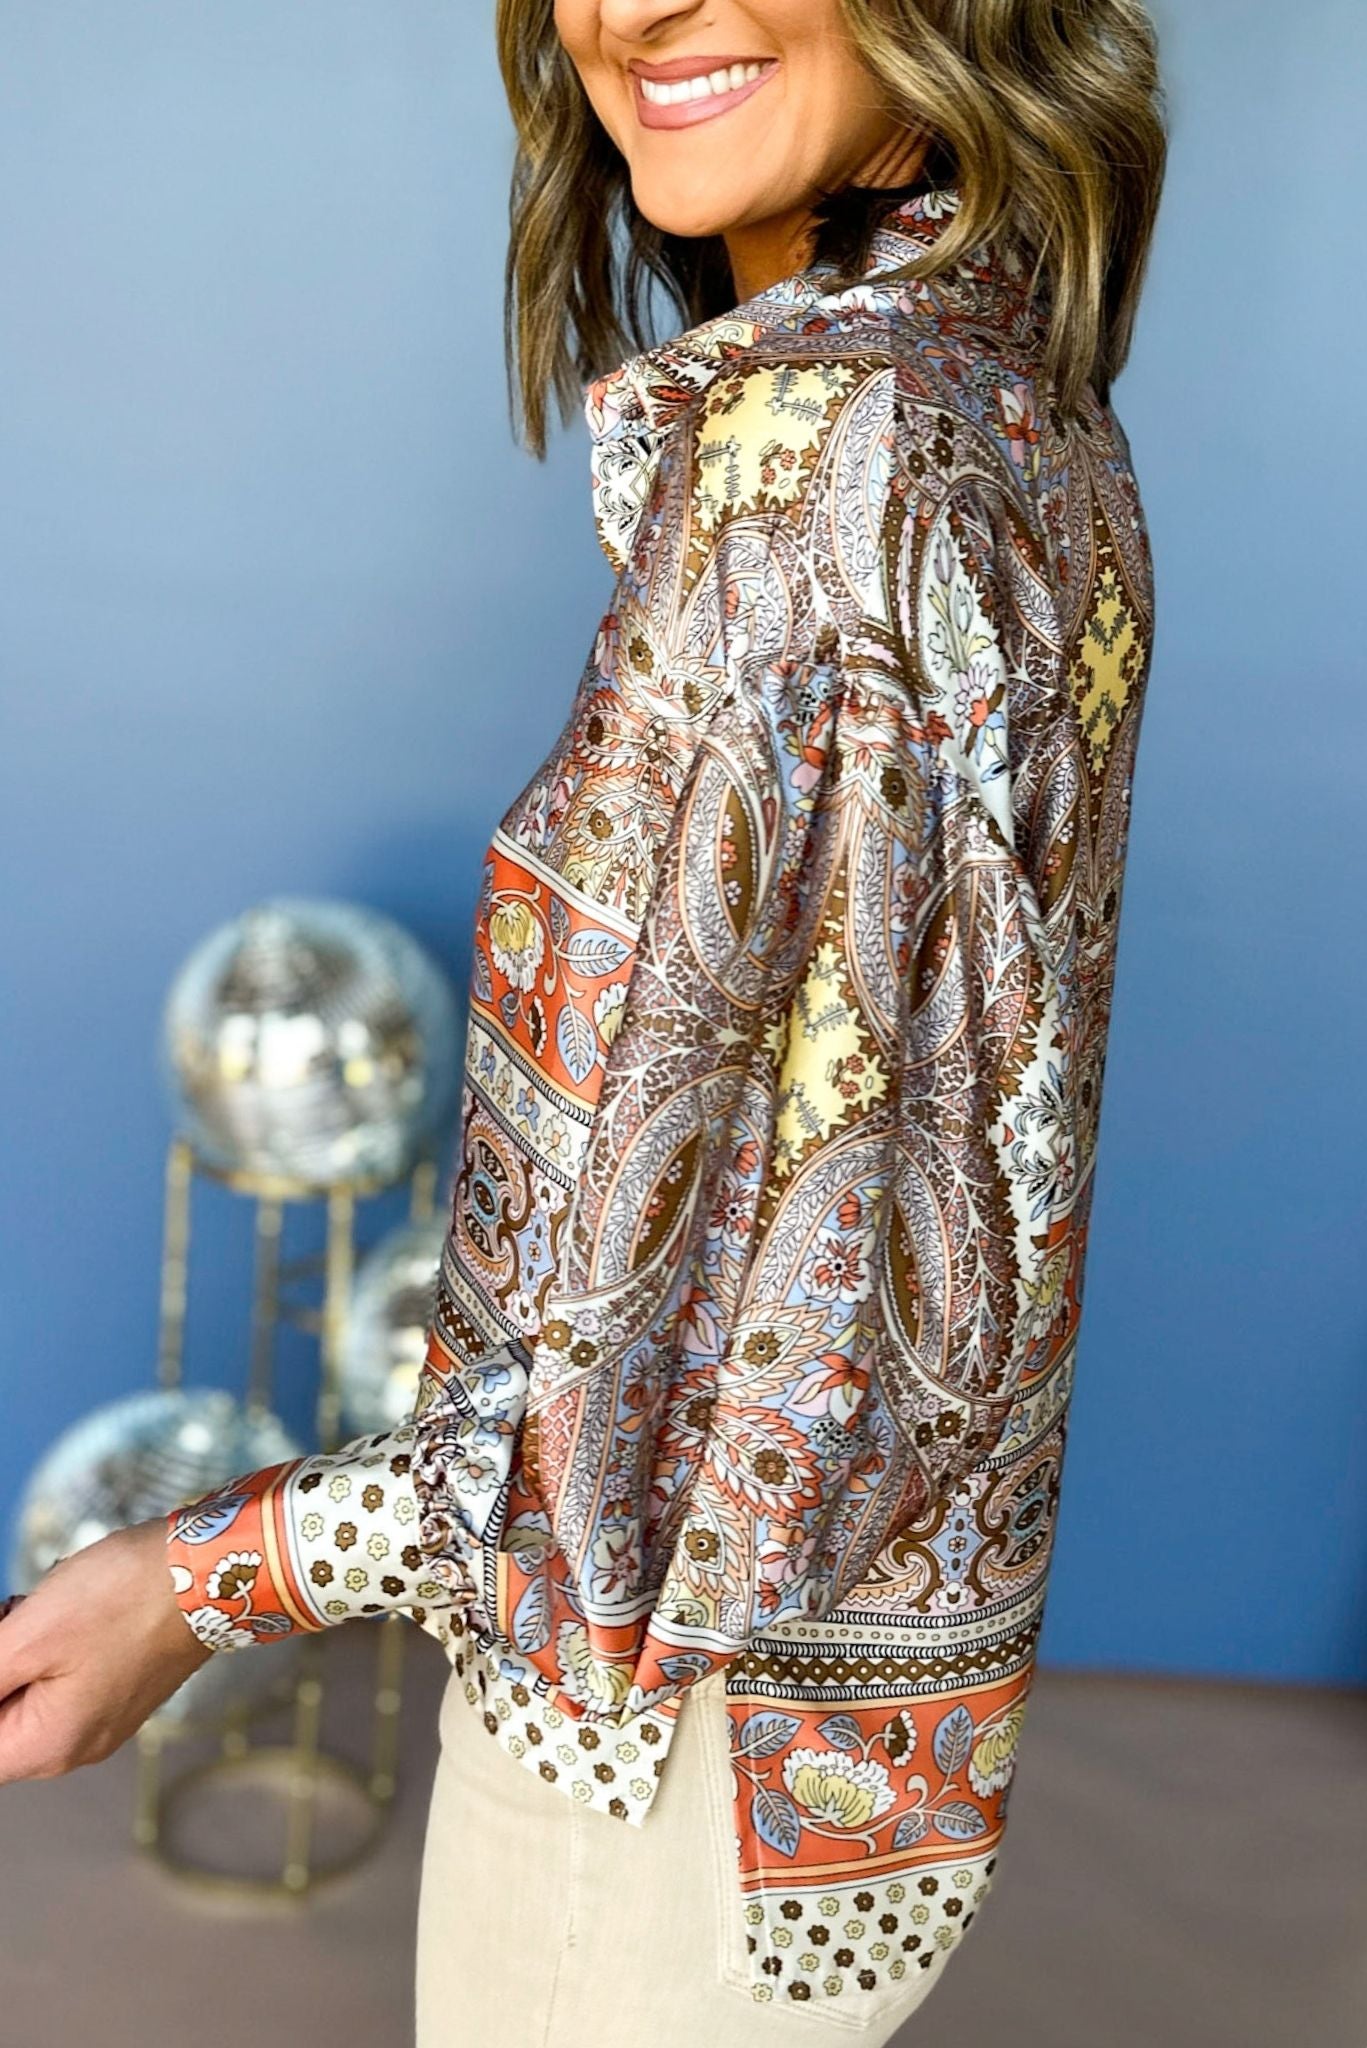 Brown Aztec Printed Button Down Blouson Sleeve Top, must have top, must have print, must have fall top, fall top, fall style, mom style, elevated style, chic style, printed top, shop style your senses by mallory fitzsimmons